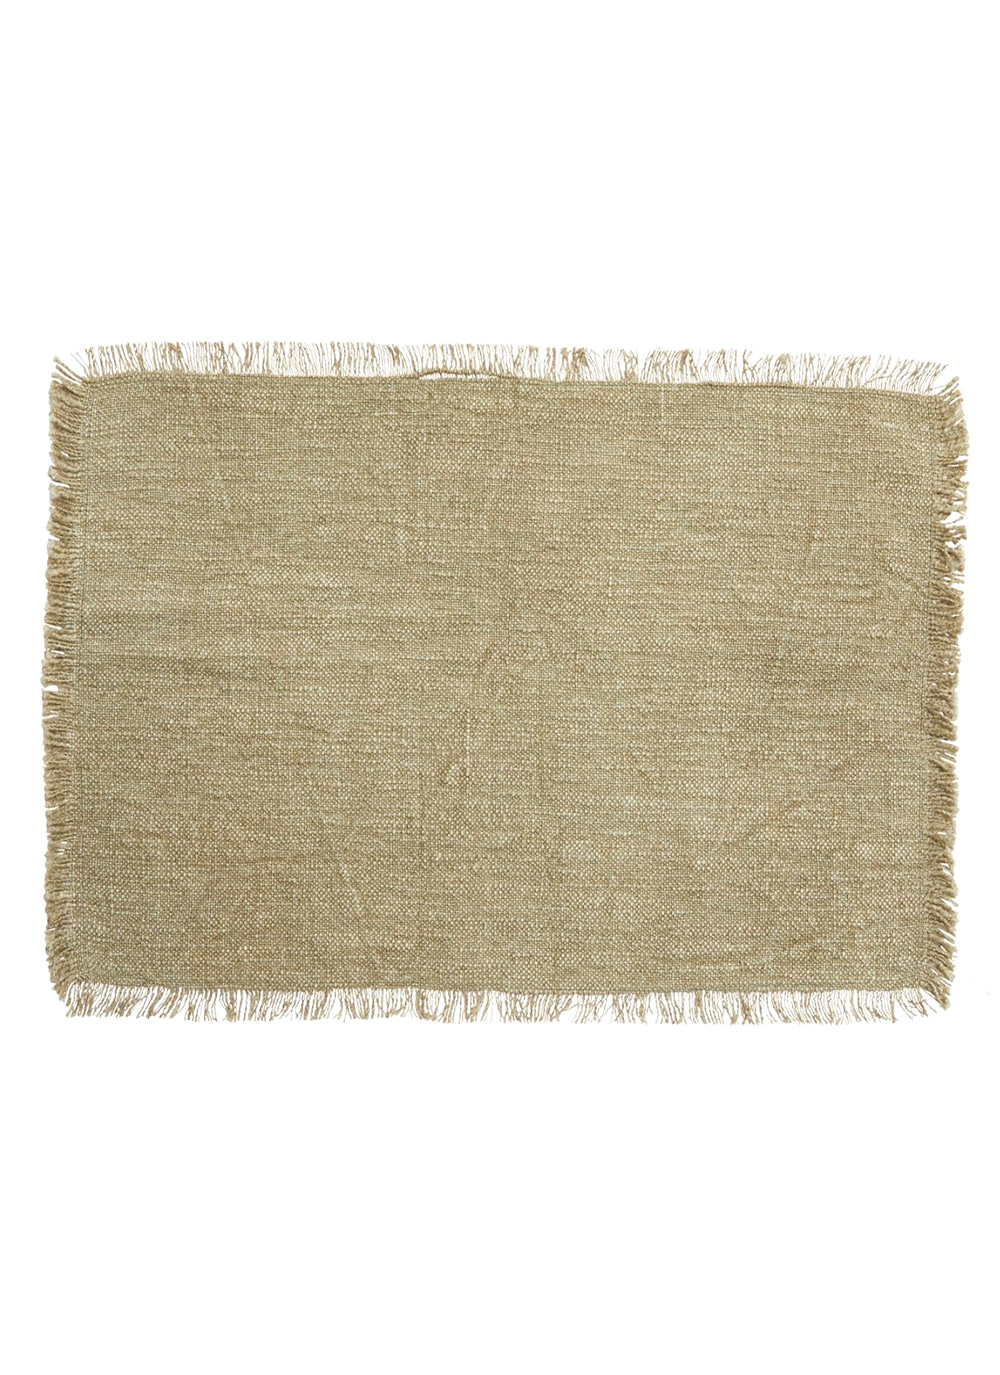 PLACEMAT, DUSTY GREEN, FRINGES